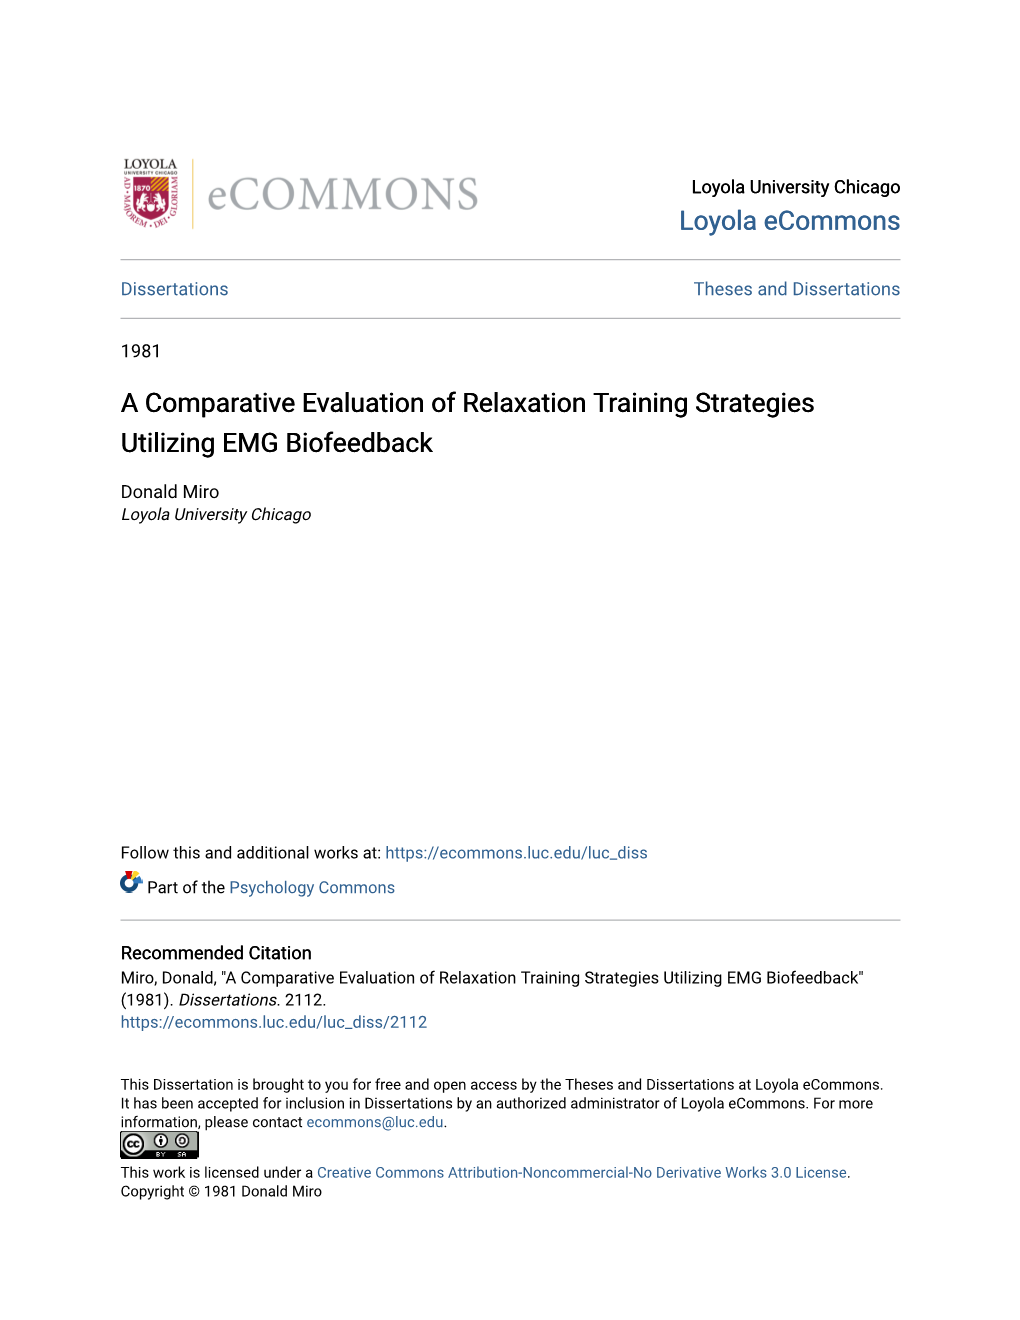 A Comparative Evaluation of Relaxation Training Strategies Utilizing EMG Biofeedback